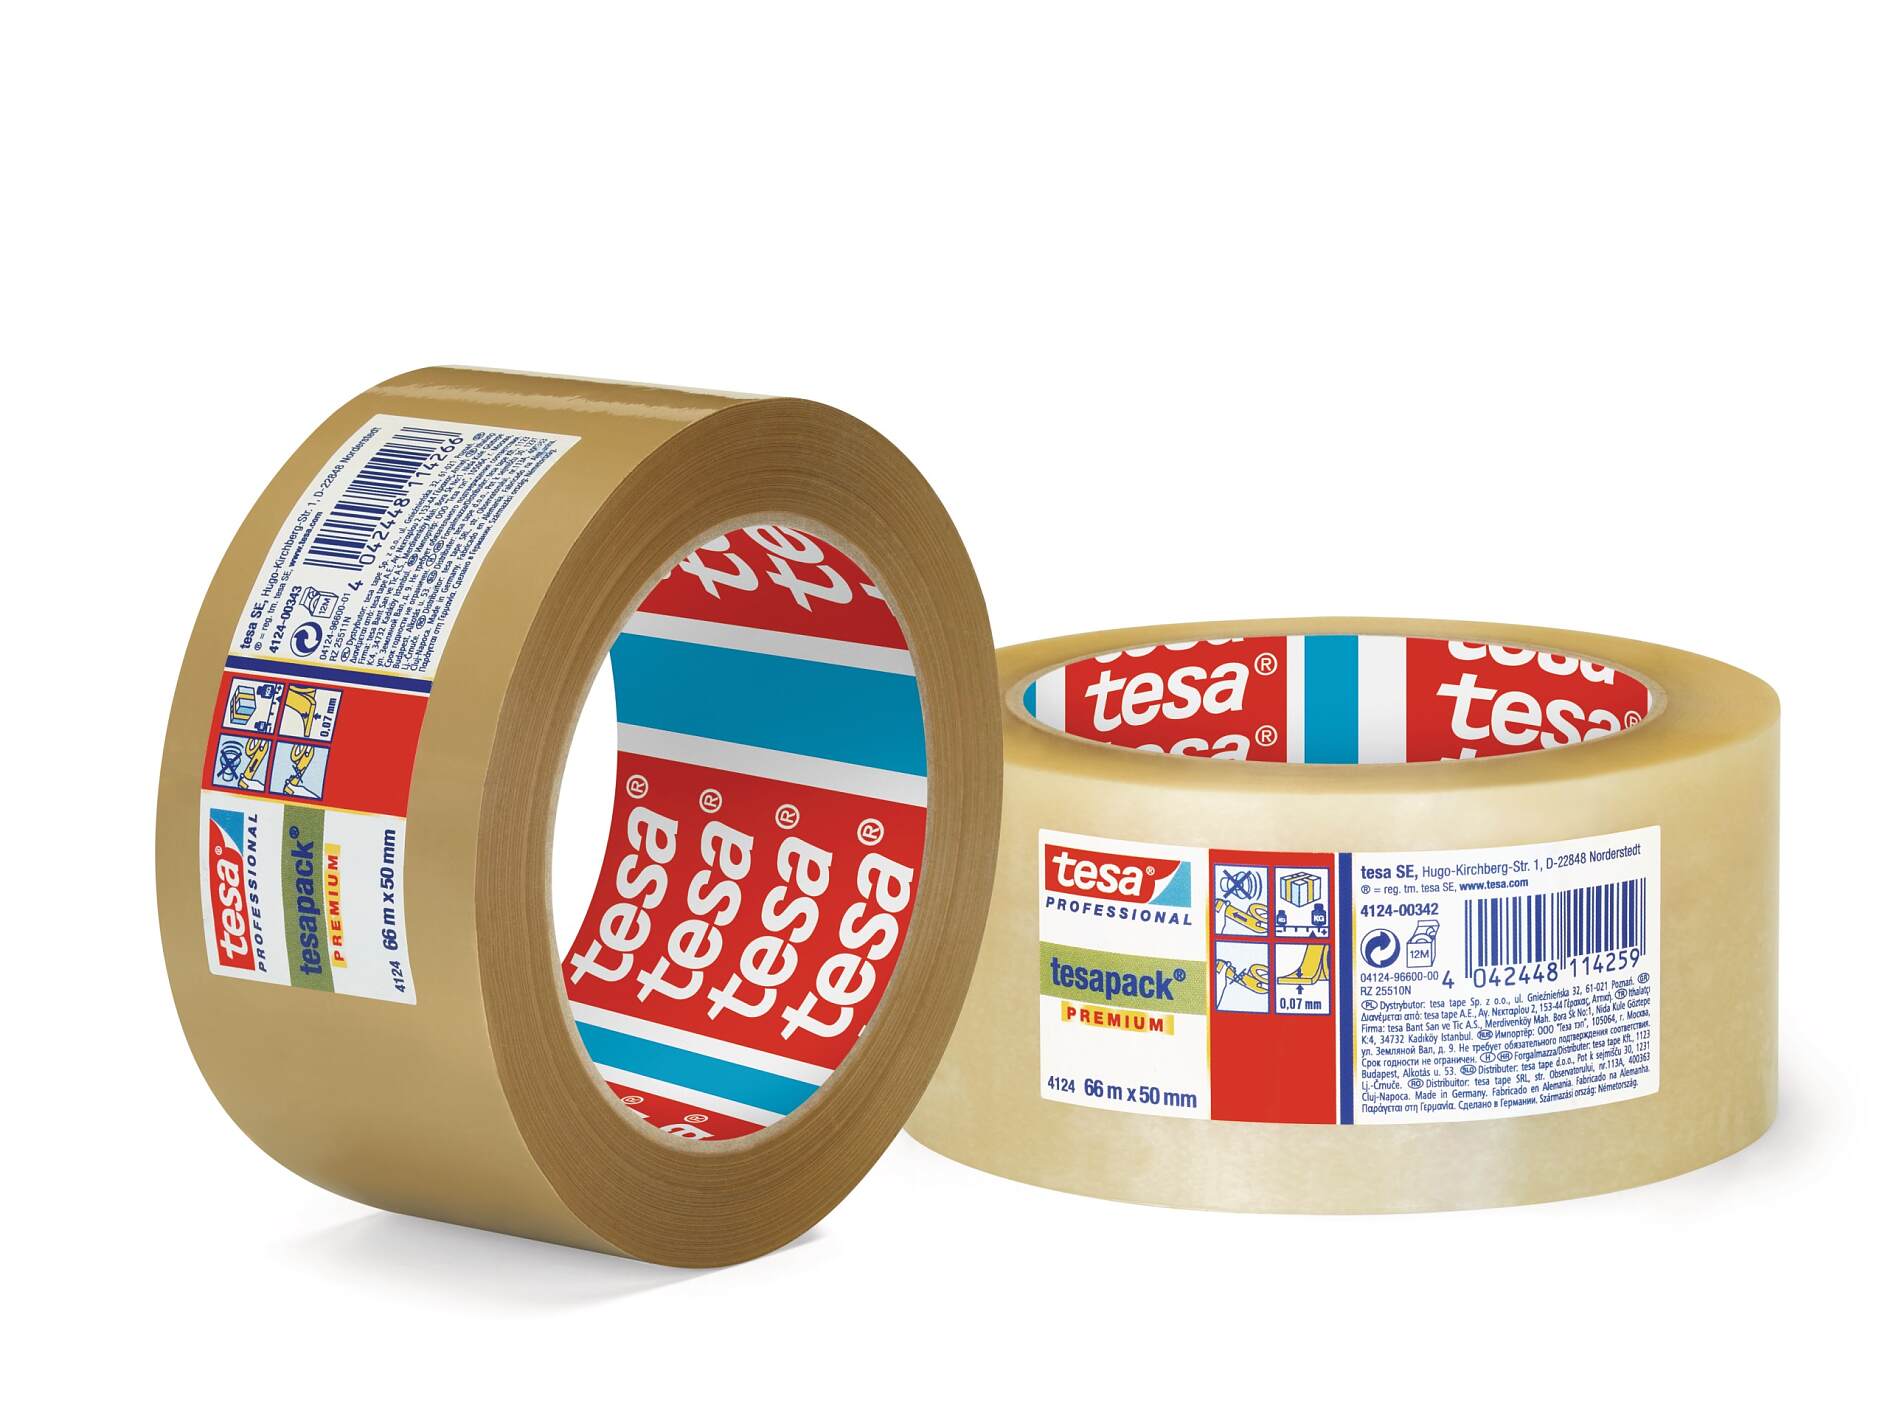 tesa Tape: What You Should Know